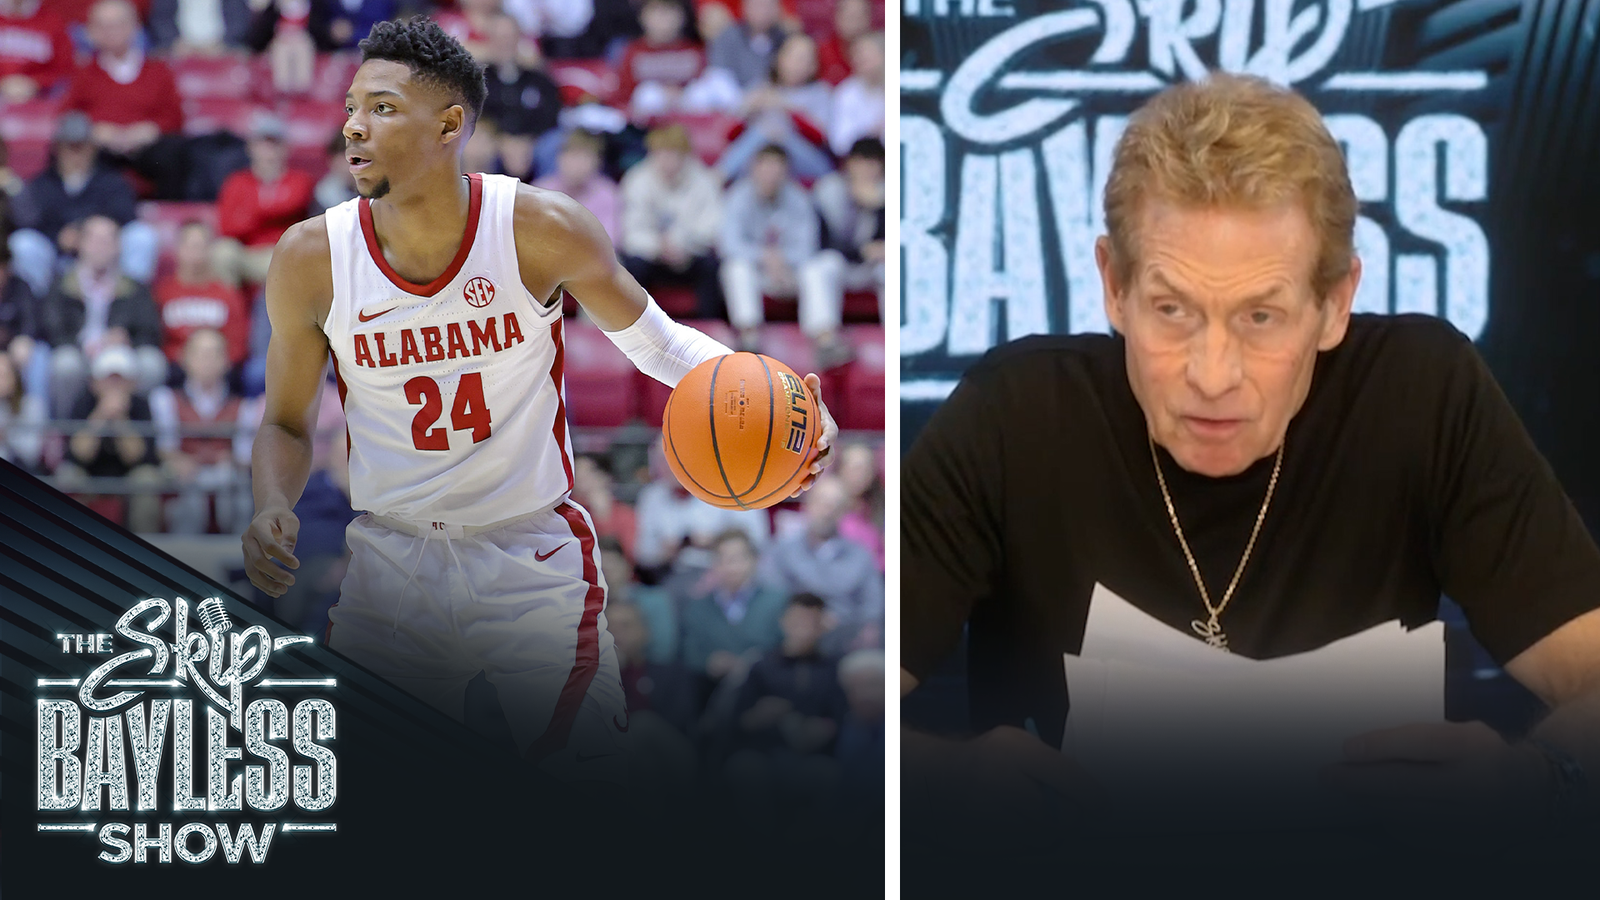 Here's the NCAA team Skip Bayless is betting on to win March Madness